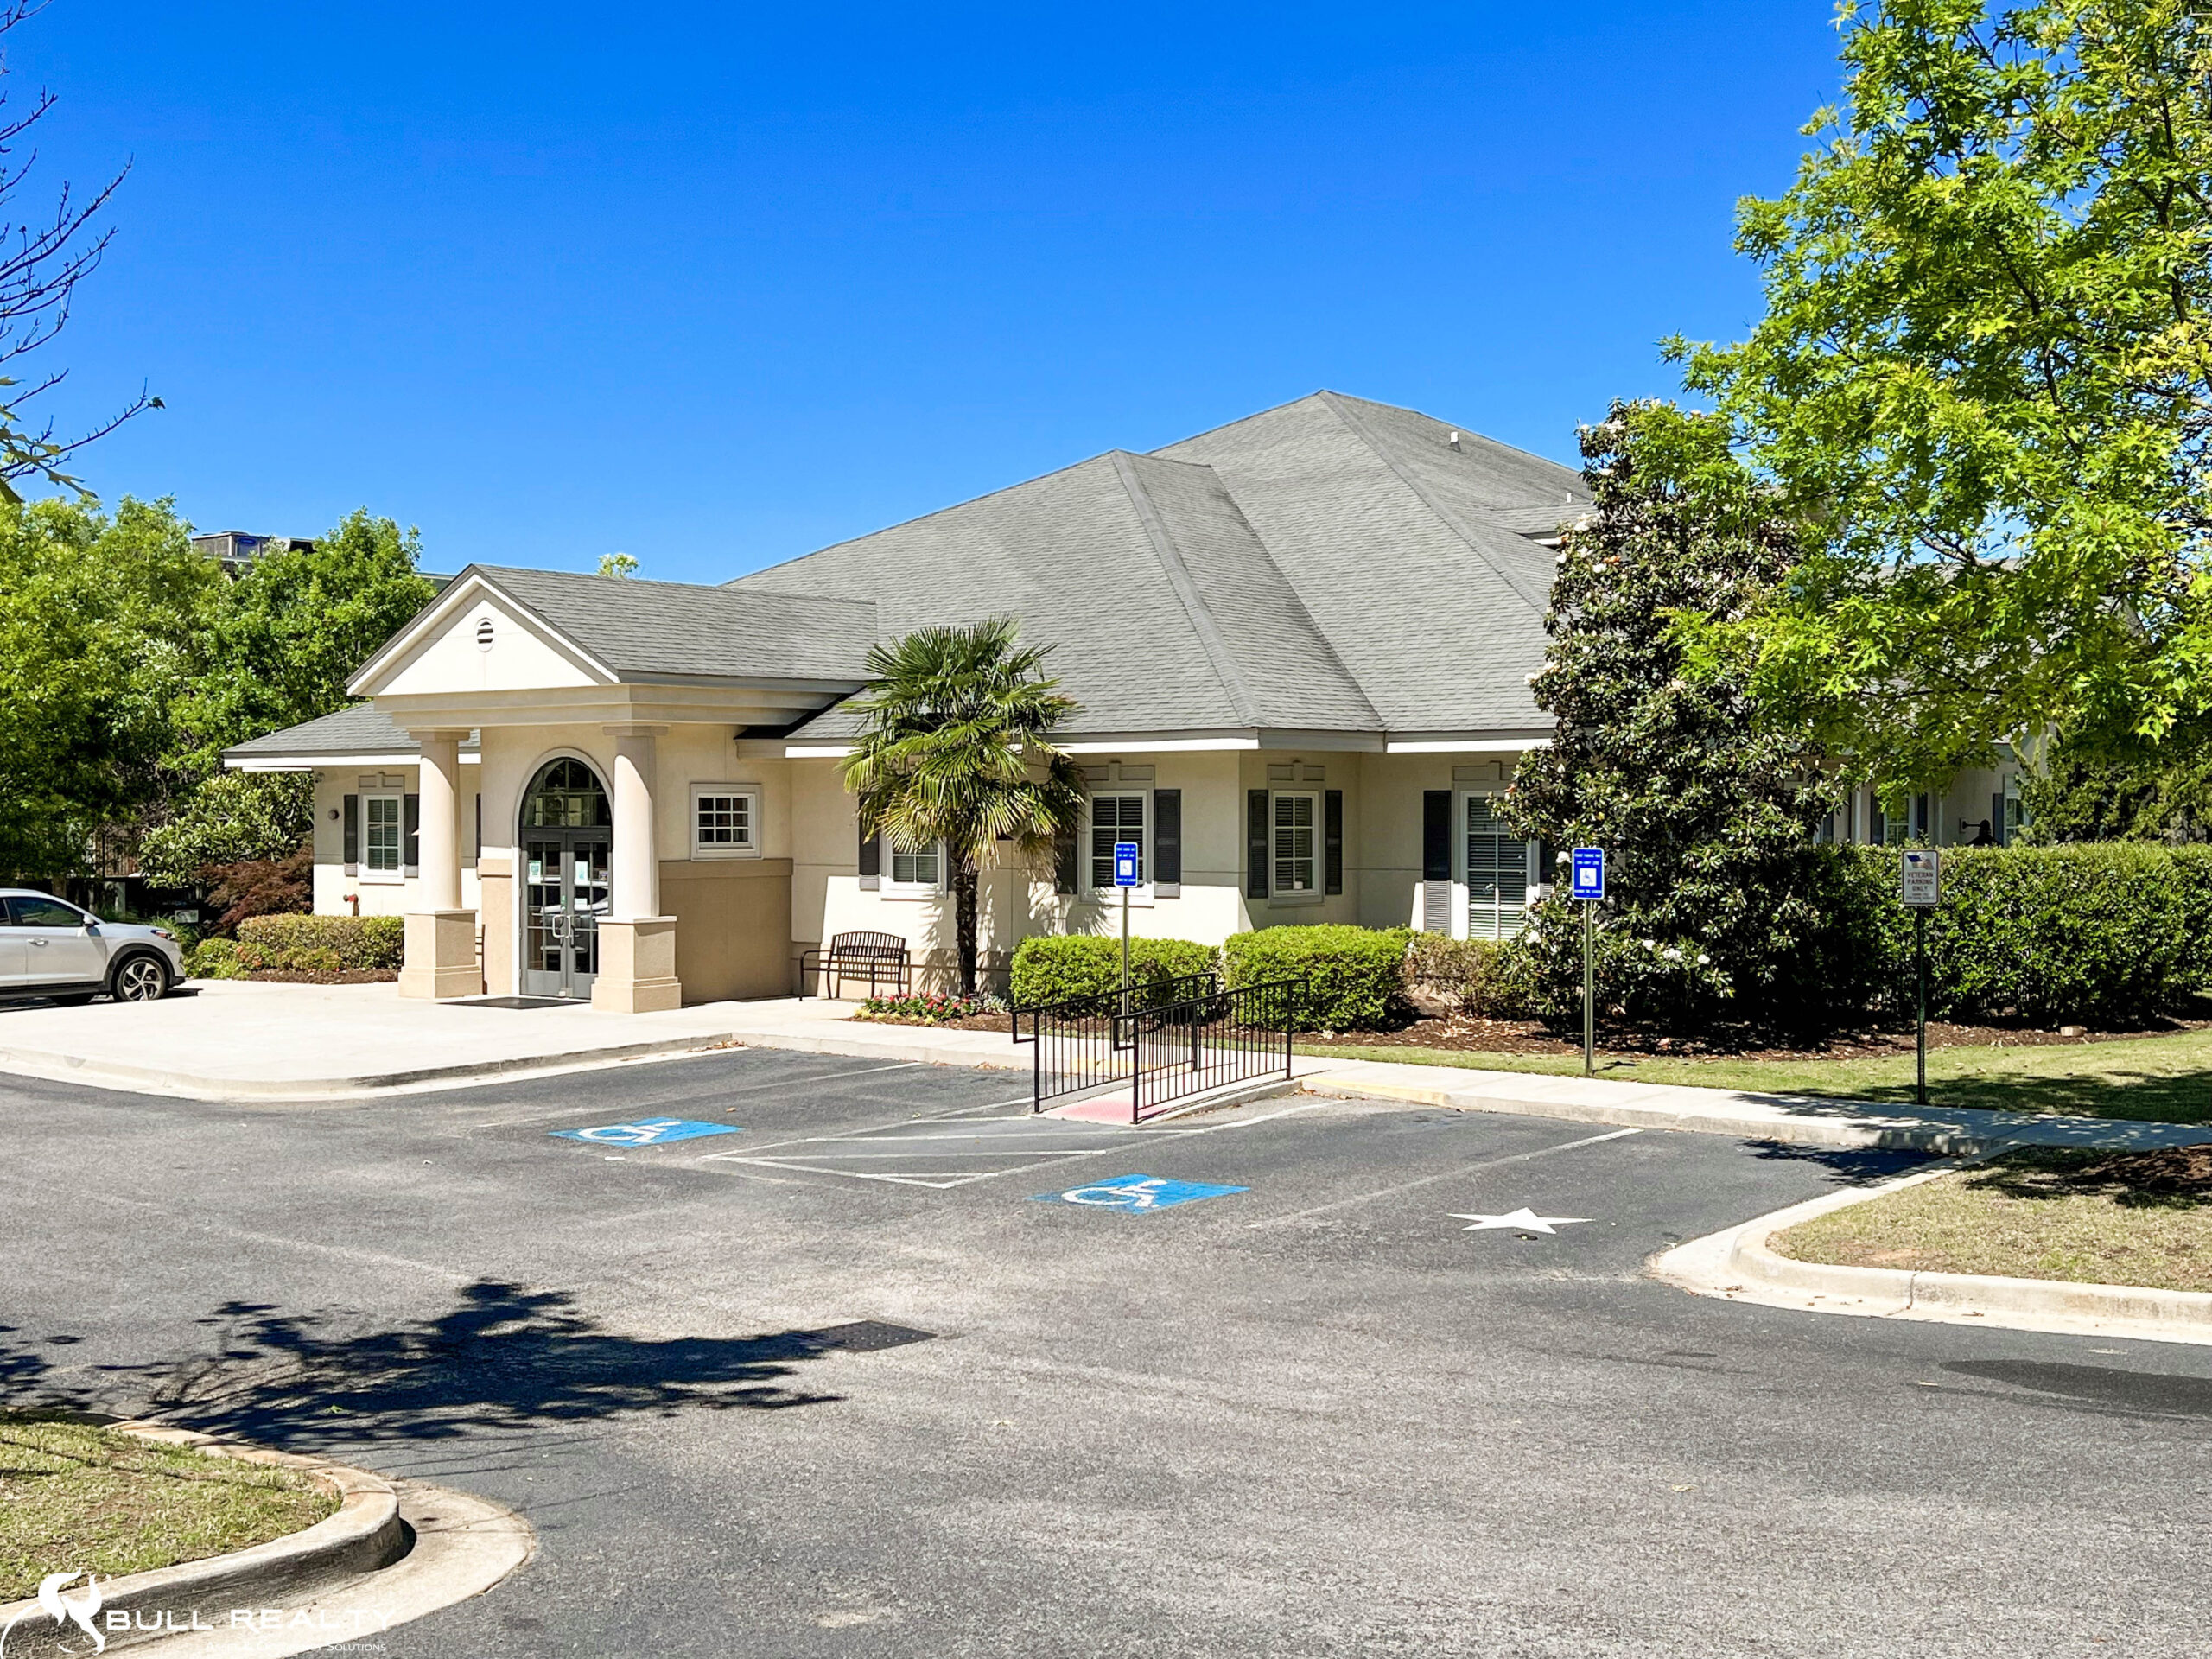 News Release: Bull Realty Arranges Sale of ±8,700 Square Foot Medical Office Building in Evans, GA